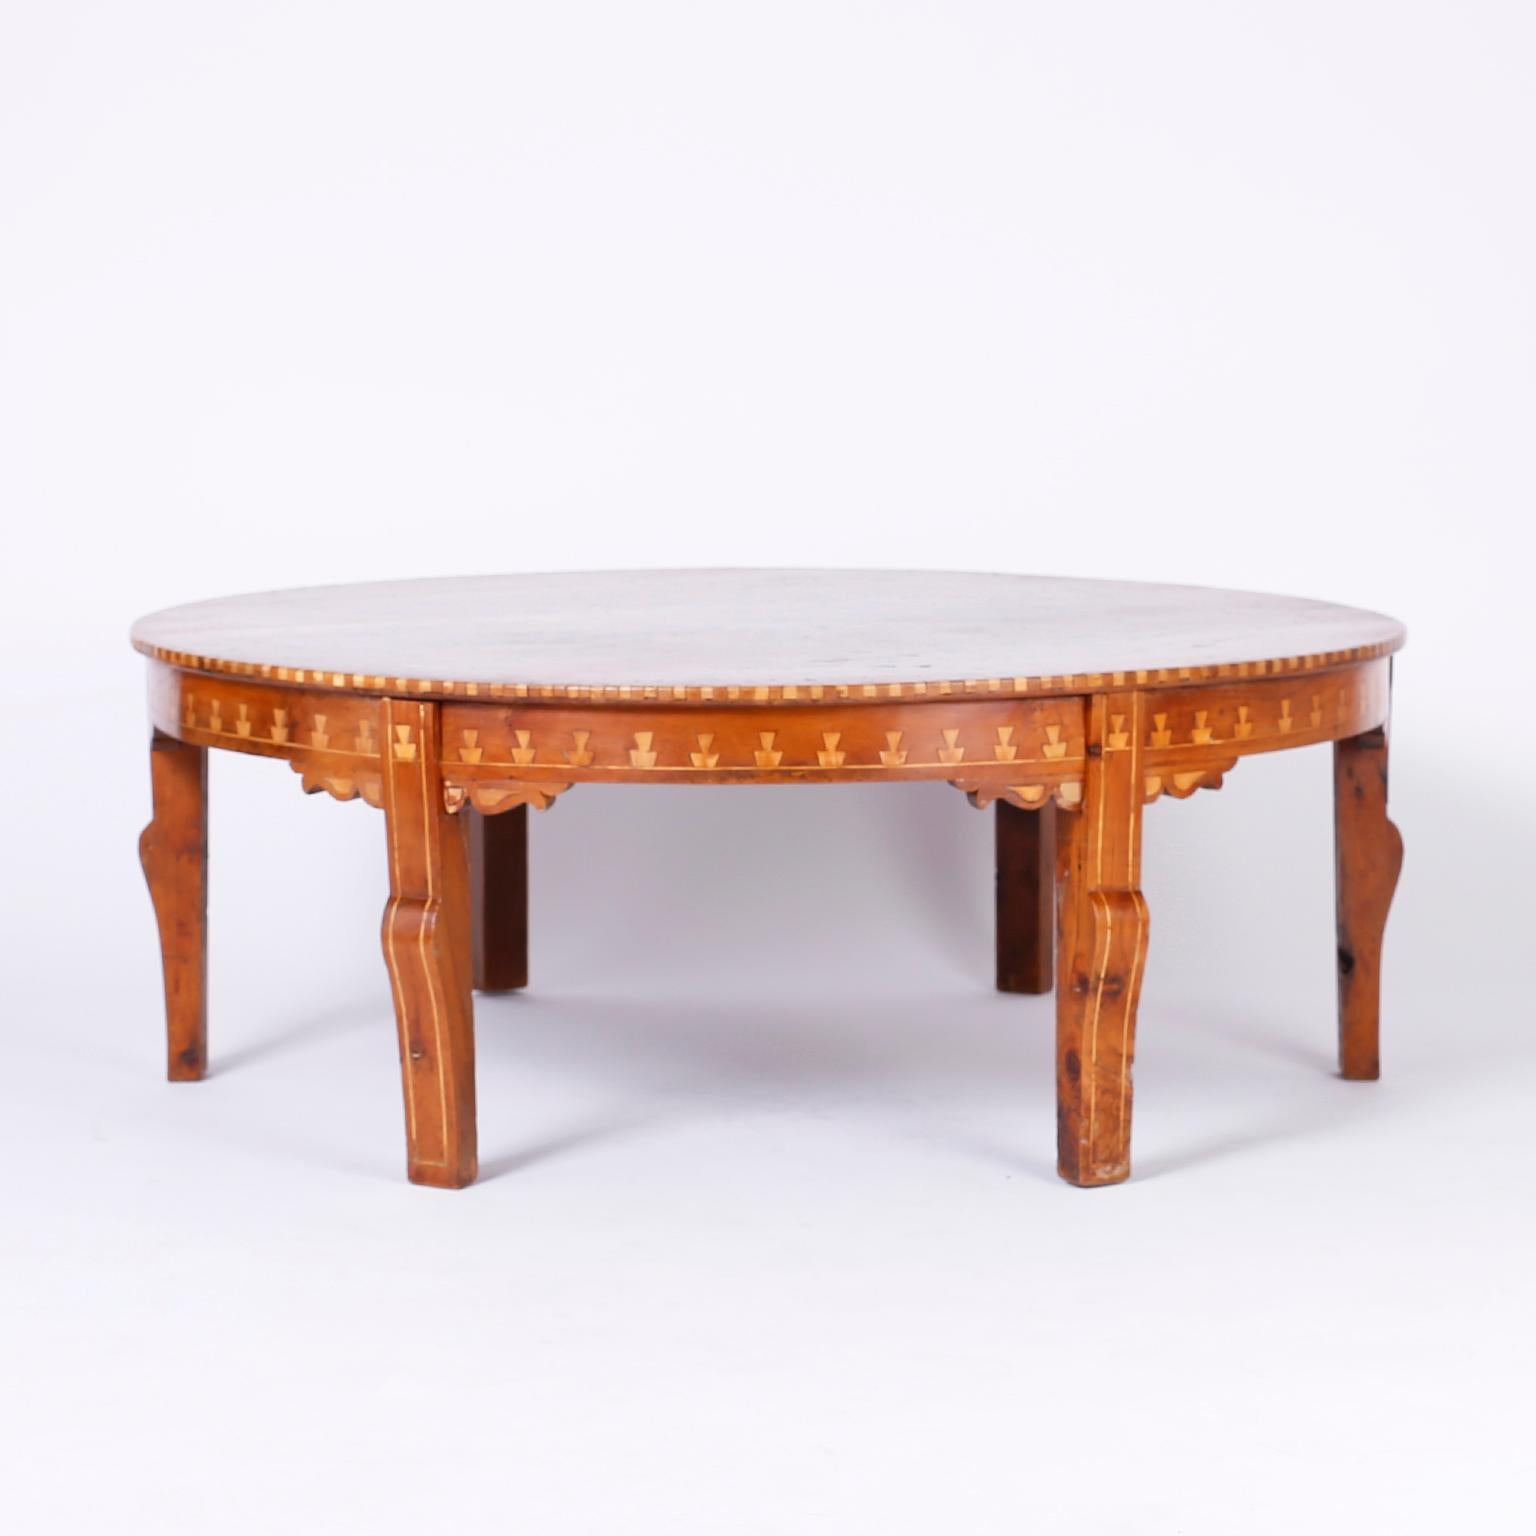 Enchanting Syrian round coffee or cocktail table with elaborate symbolic inlays of kingwood, ebony and mother of pearl, six legs, and an exotic ambiance.